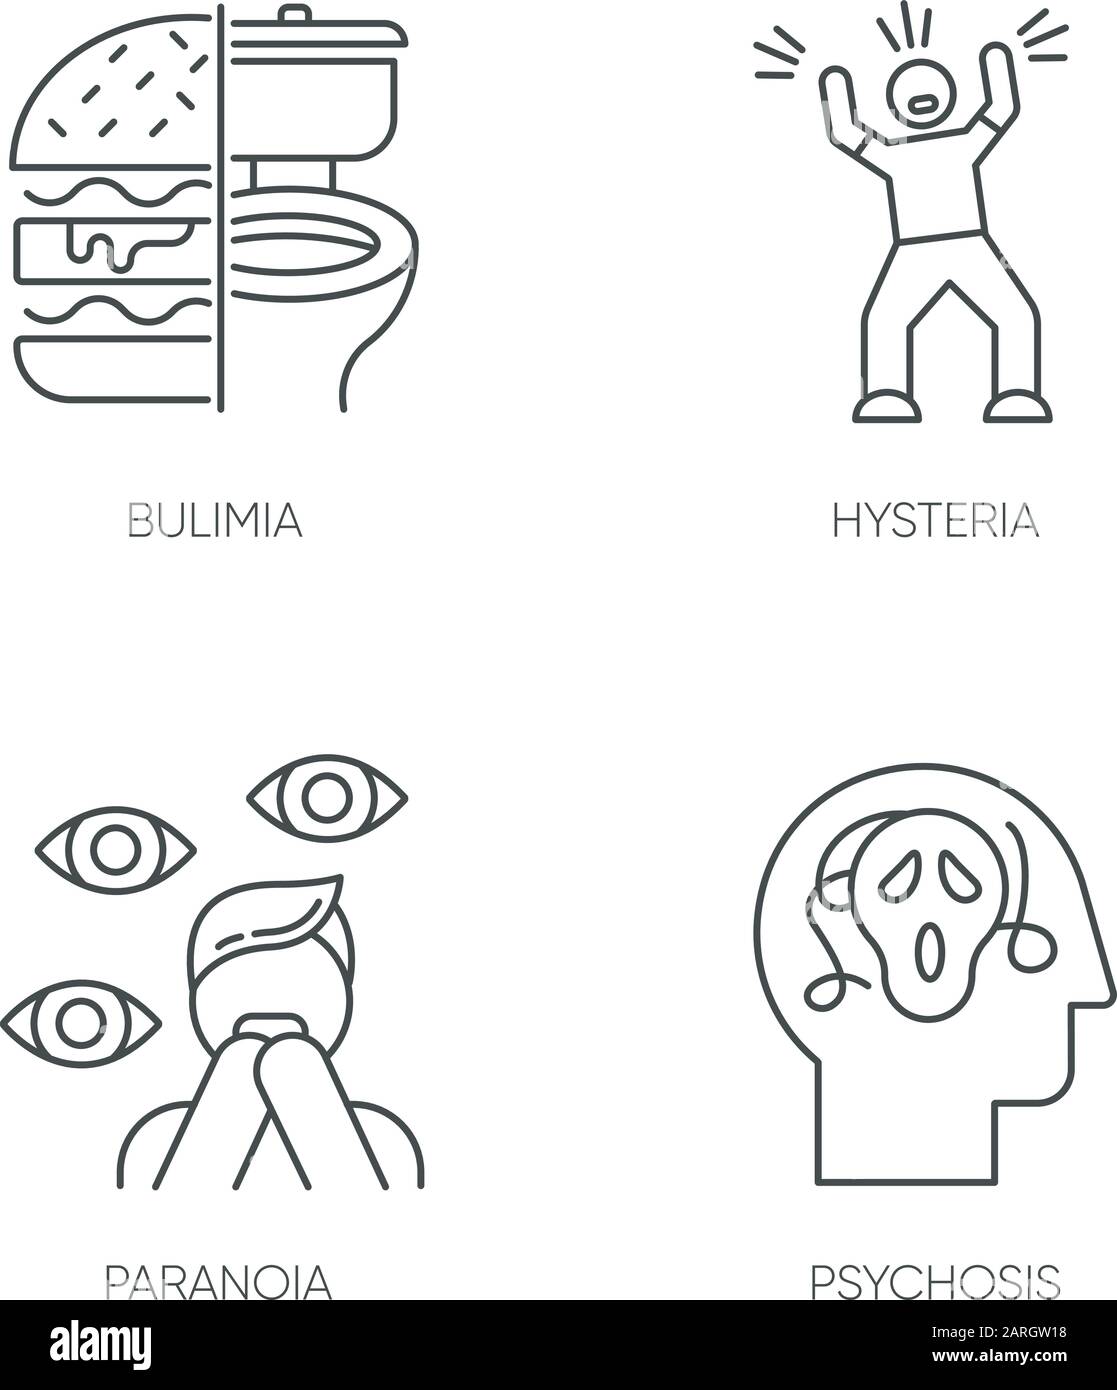 Mental disorder linear icons set. Bulimia. Eating disorder. Hysteria. Panic attack. Anxiety. Paranoia. Psychosis. Thin line contour symbols. Isolated Stock Vector